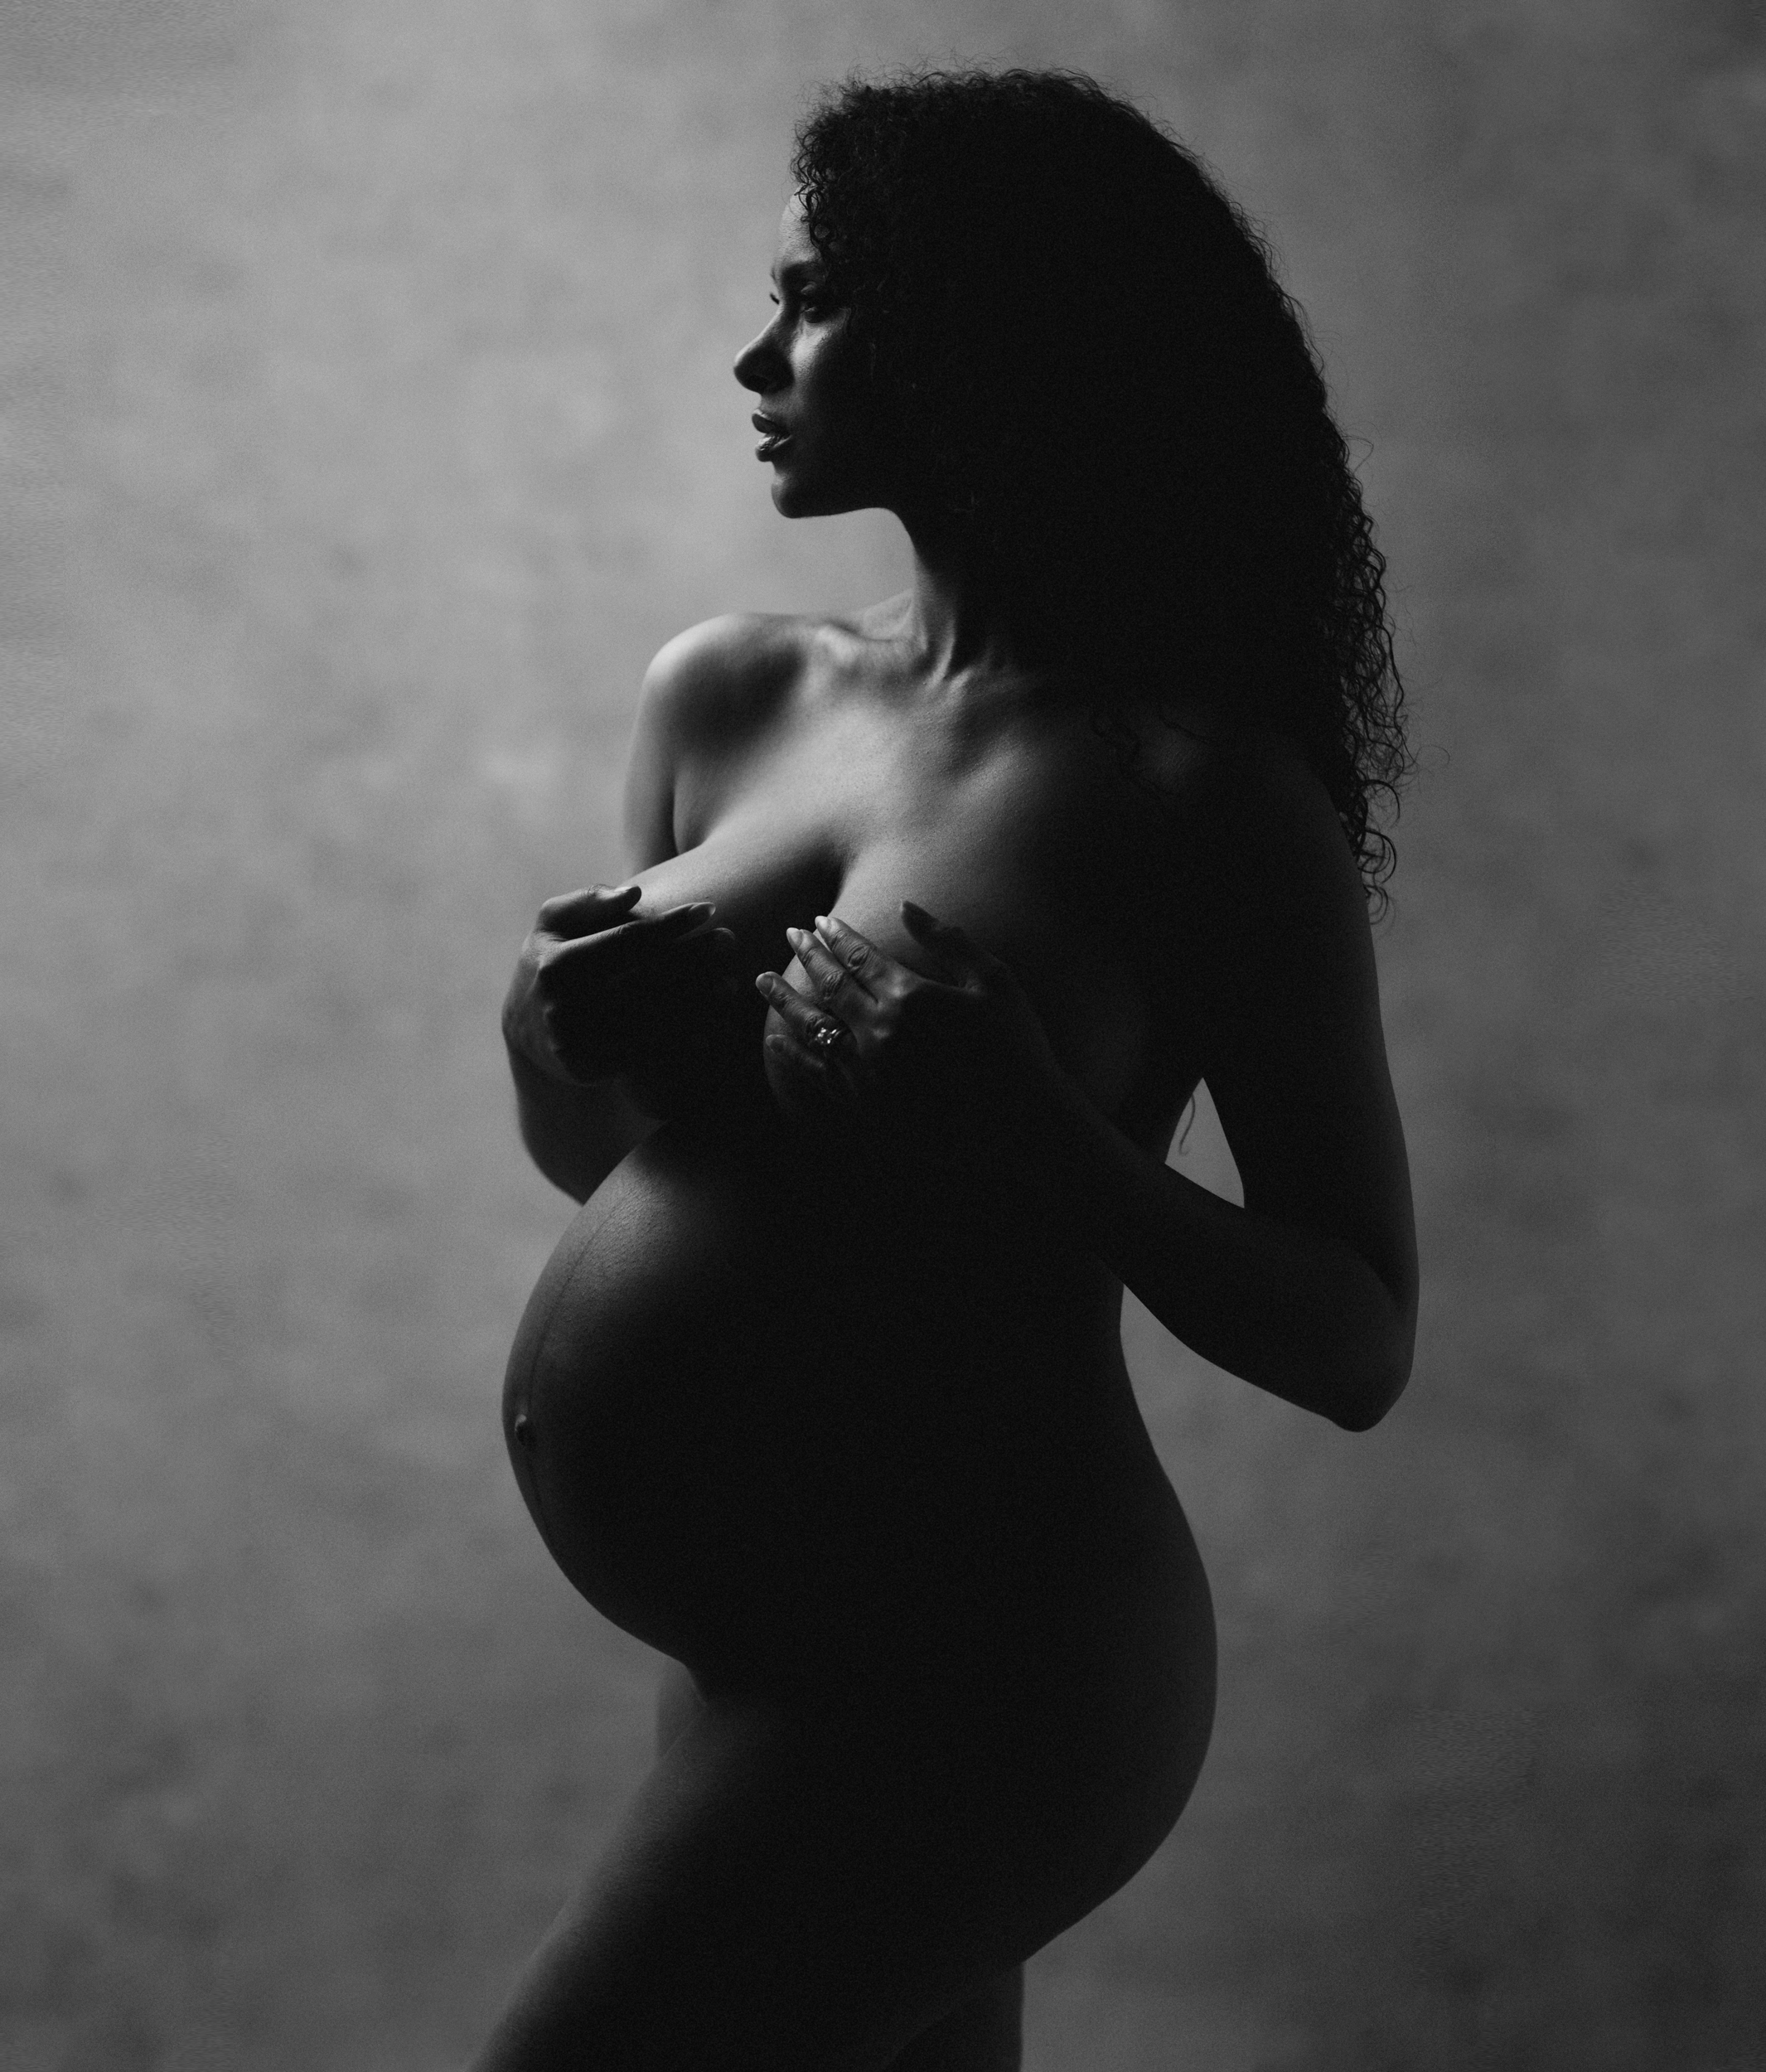 artistic maternity silhouettes and b&amp;w portraits of pregnancy. Lola Melani empowered women to embrace their changing bodies